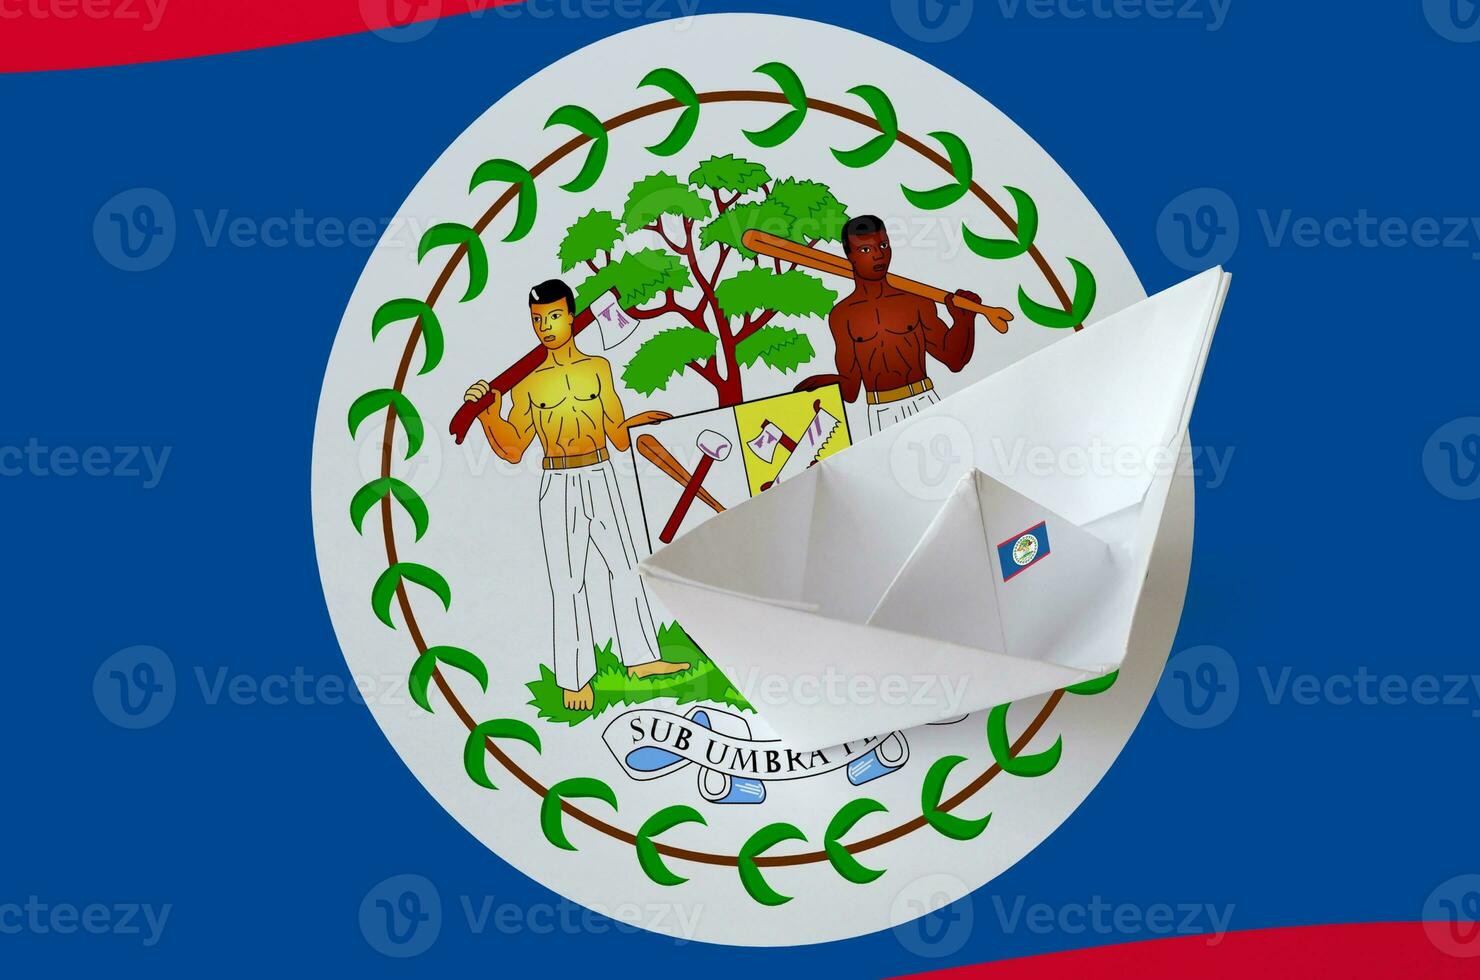 Belize flag depicted on paper origami ship closeup. Handmade arts concept photo